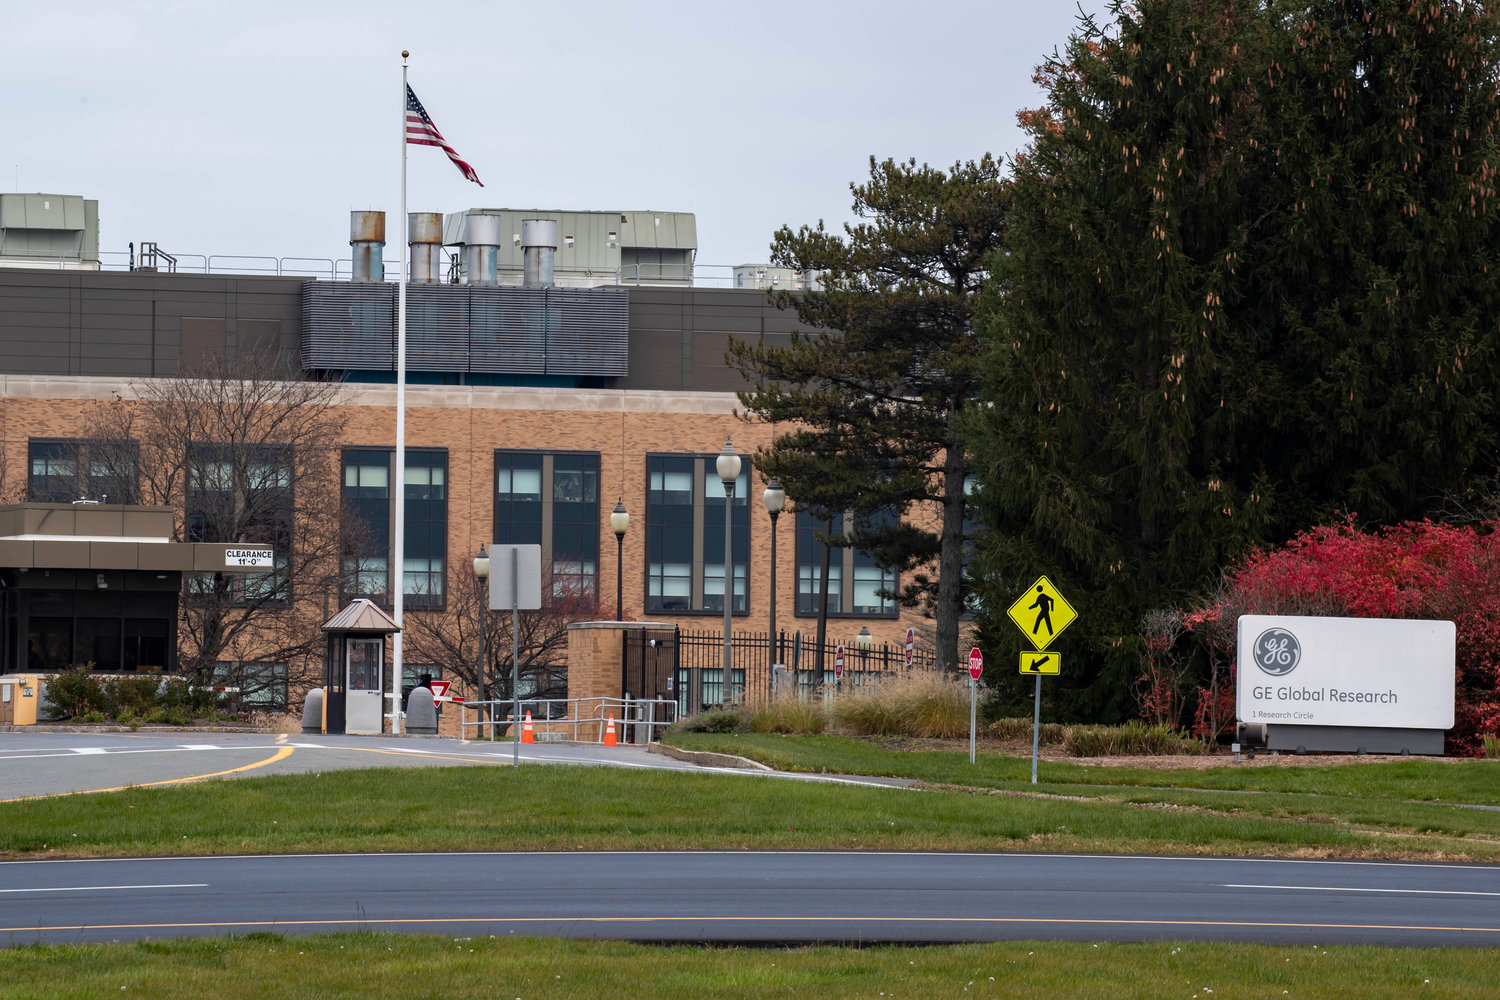 The main entrance to the General Electric Research &amp; Development facility located at  1 Research Circle in Niskayuna is seen in this file photo. The facility has been awarded $6.4 million in federal funding to develop nuclear fuel reprocessing technology.